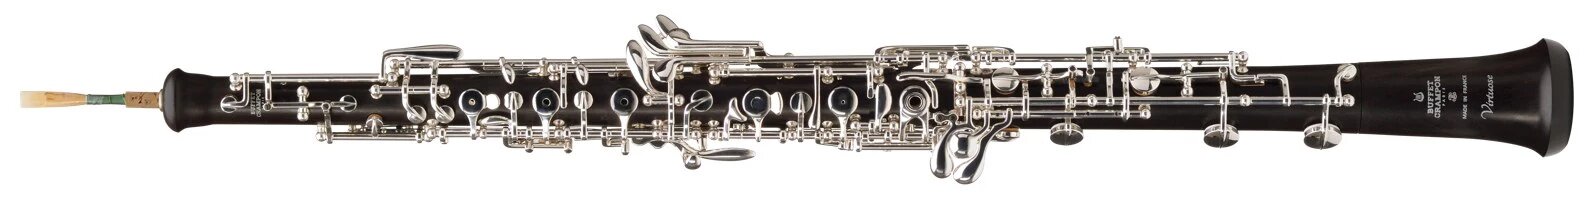 Buffet Crampon Virtuoso Semi-automatic, 3 octave keys, resized top body, Green LinE inserts, natural C key, two keyless grenadilla bells, silver plated - in case : photo 1